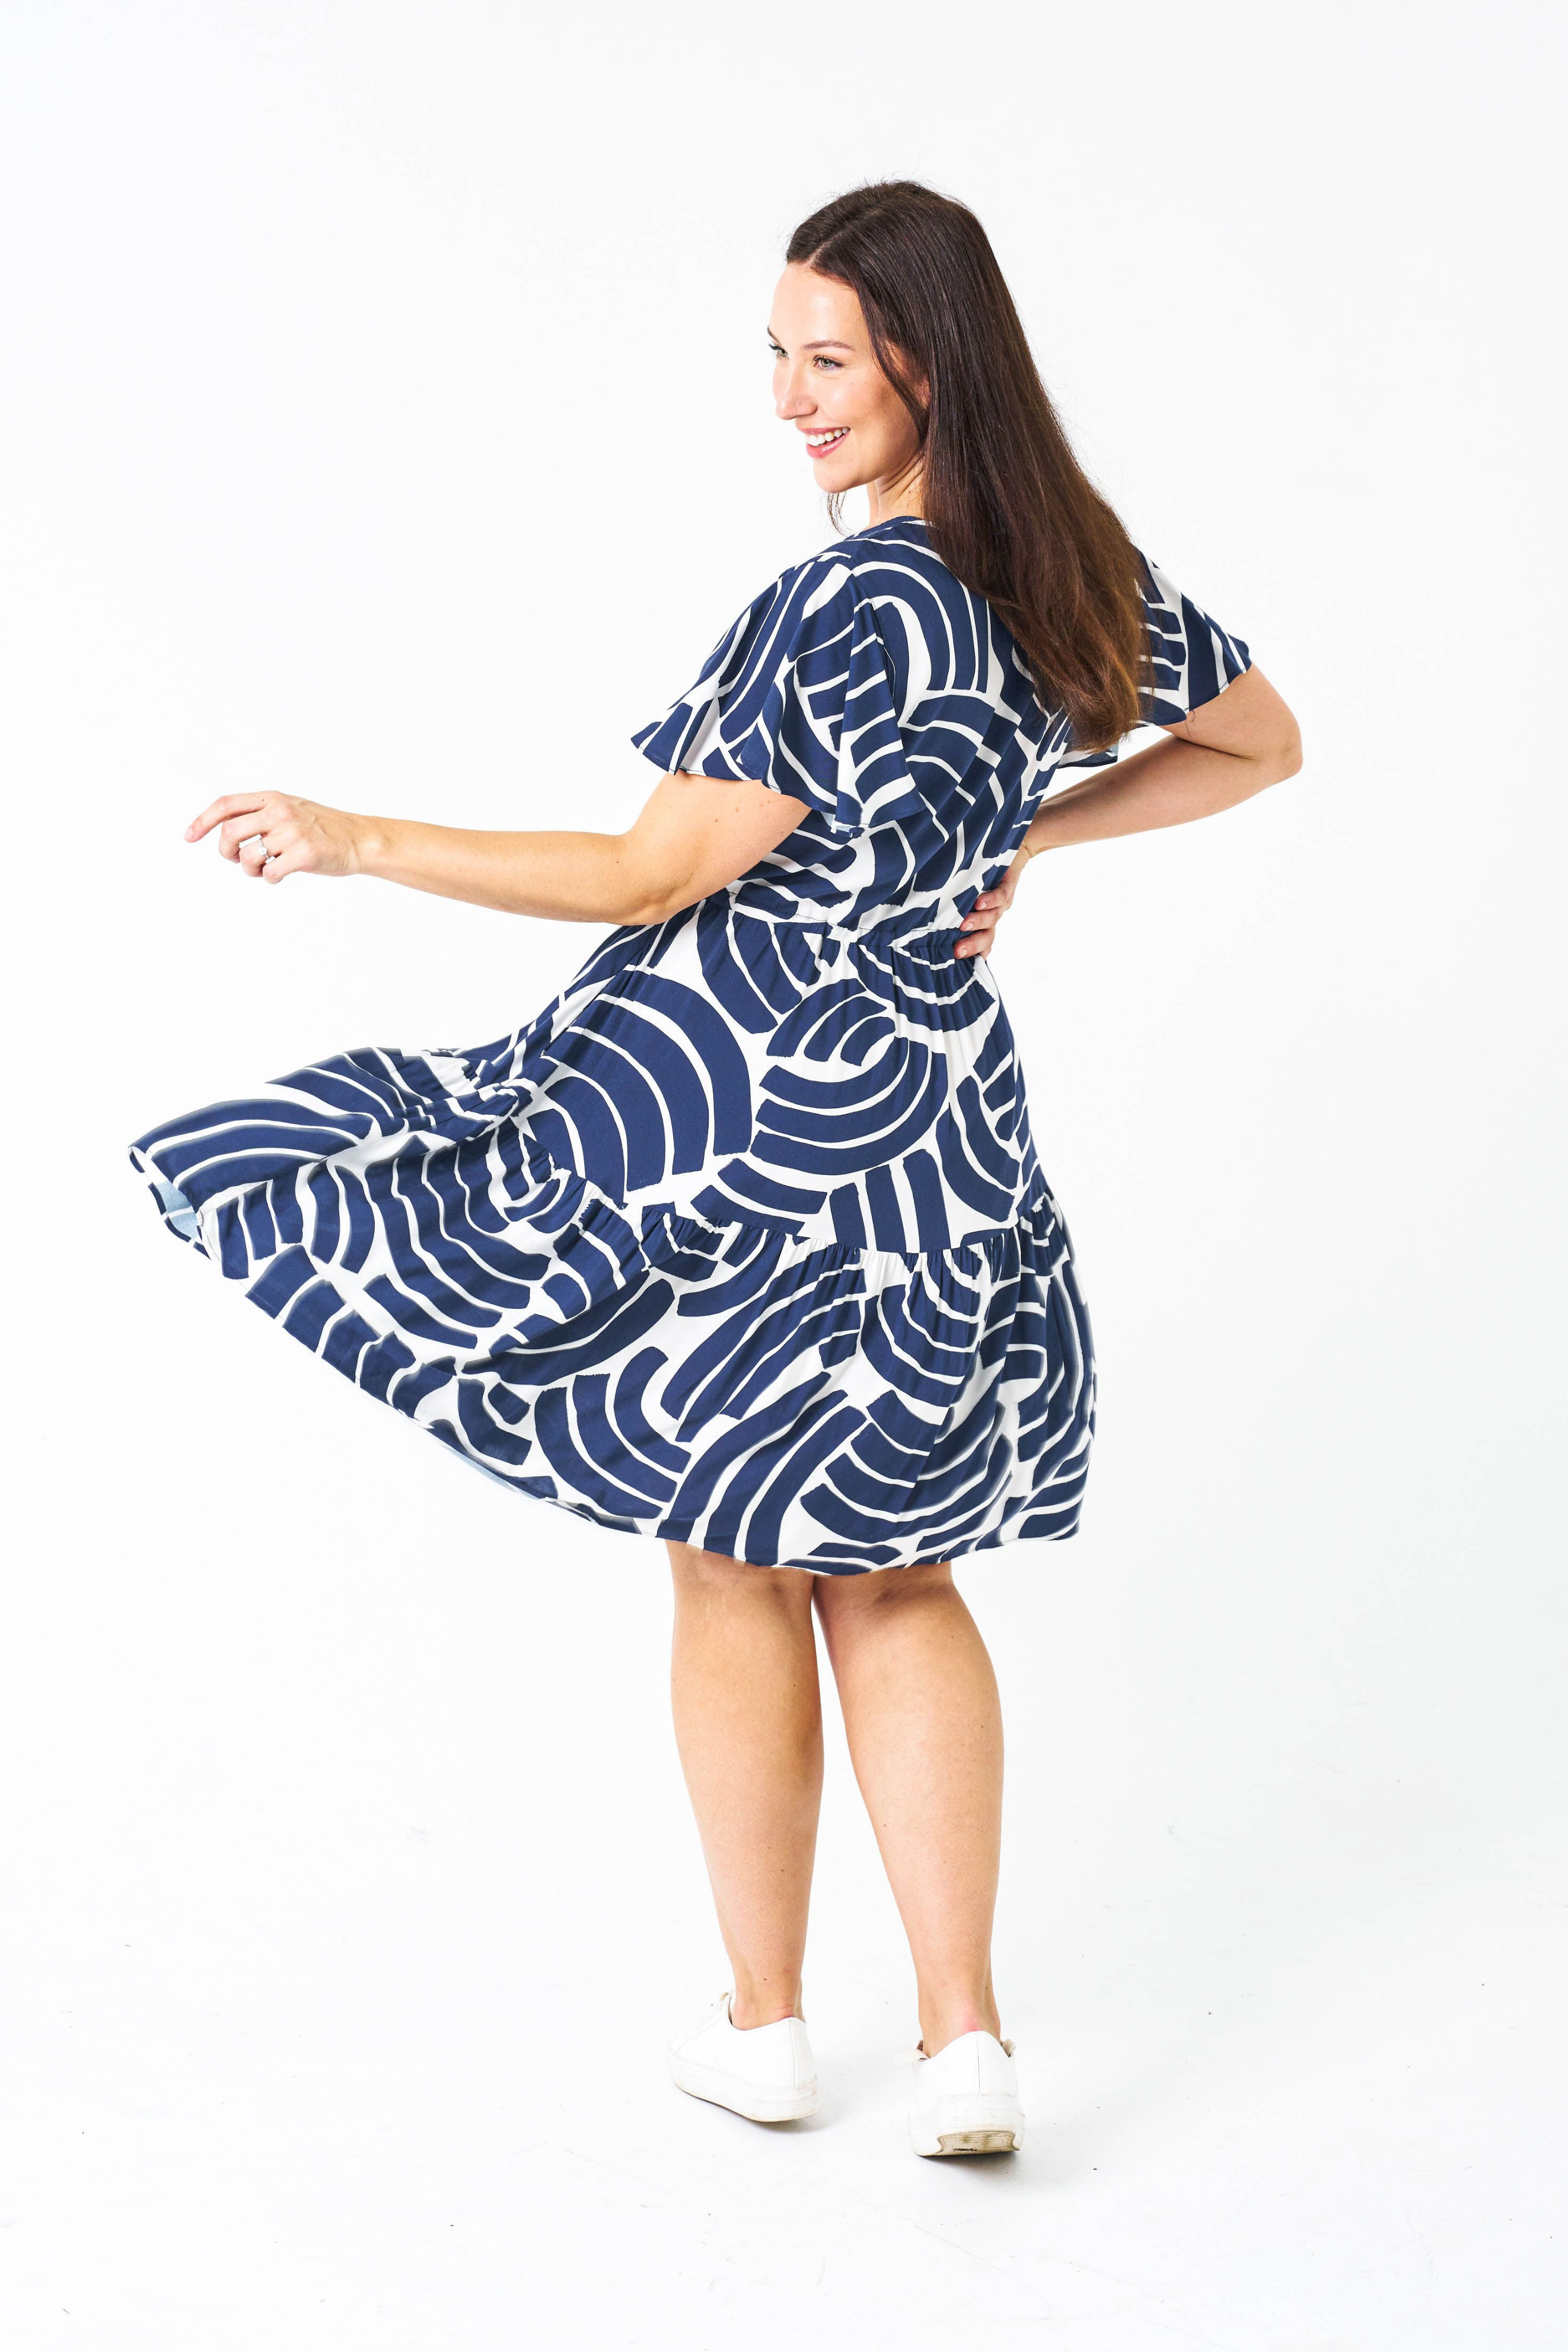 MARLIE Mini Dress in Navy and White Print no